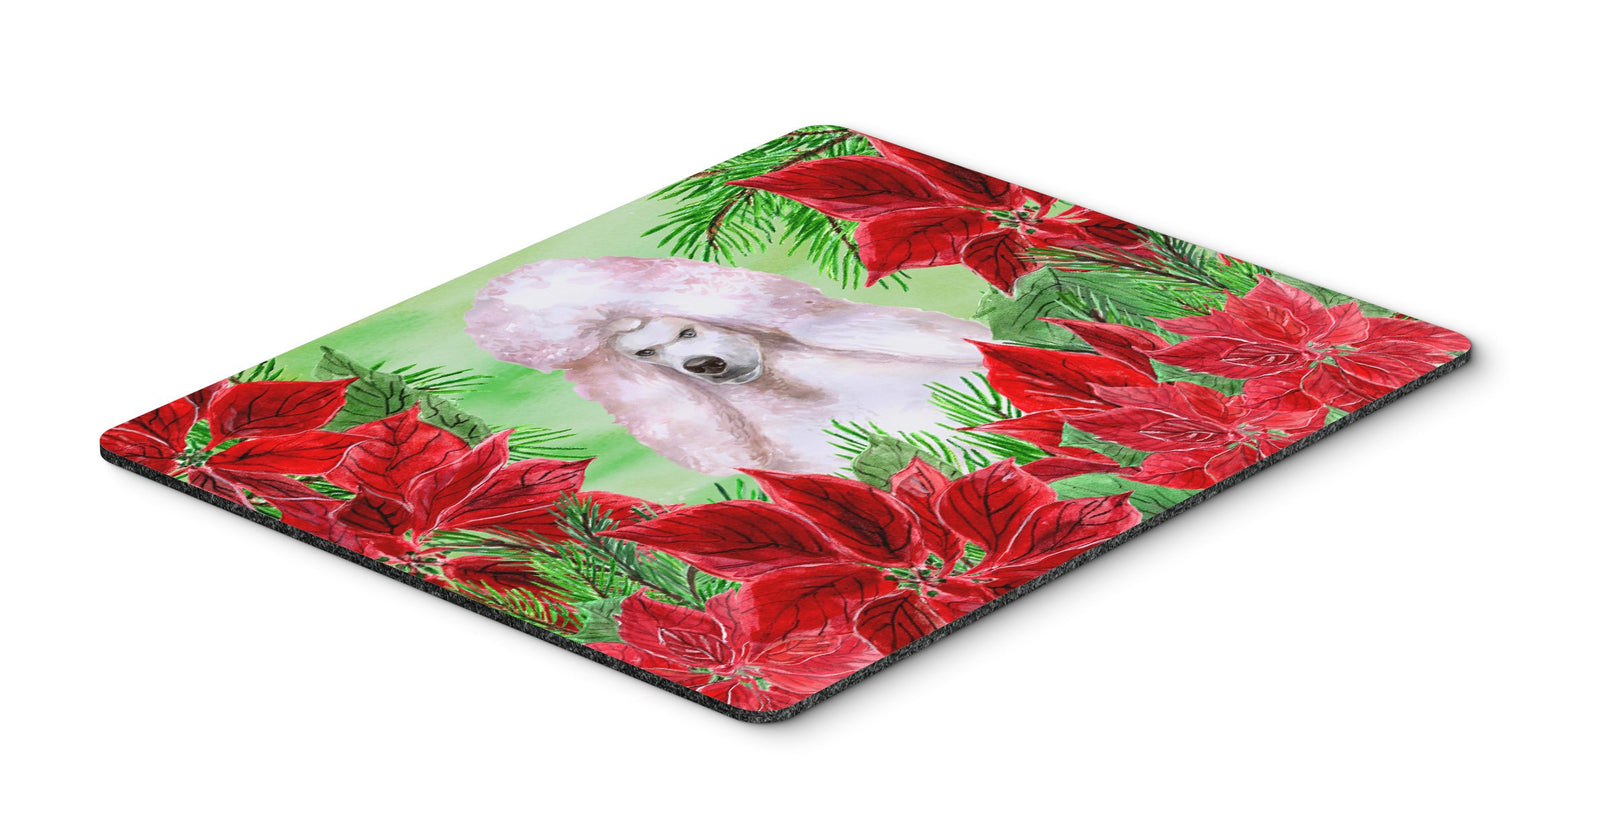 White Standard Poodle Poinsettas Mouse Pad, Hot Pad or Trivet CK1364MP by Caroline's Treasures